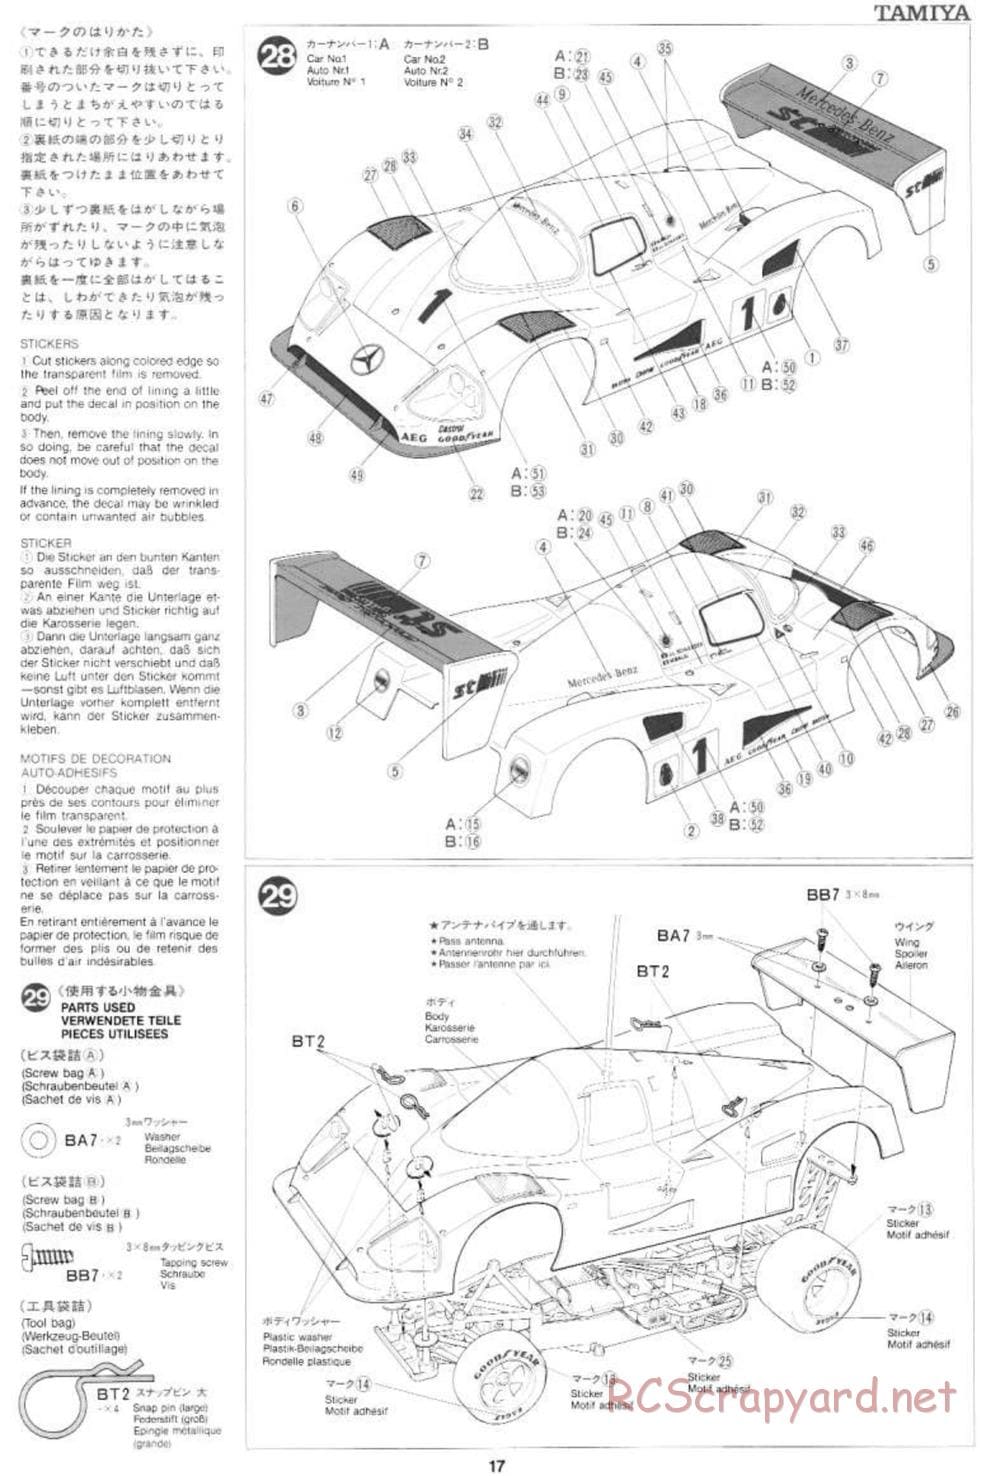 Tamiya - Mercedes-Benz C11 - Group-C Chassis - Manual - Page 17